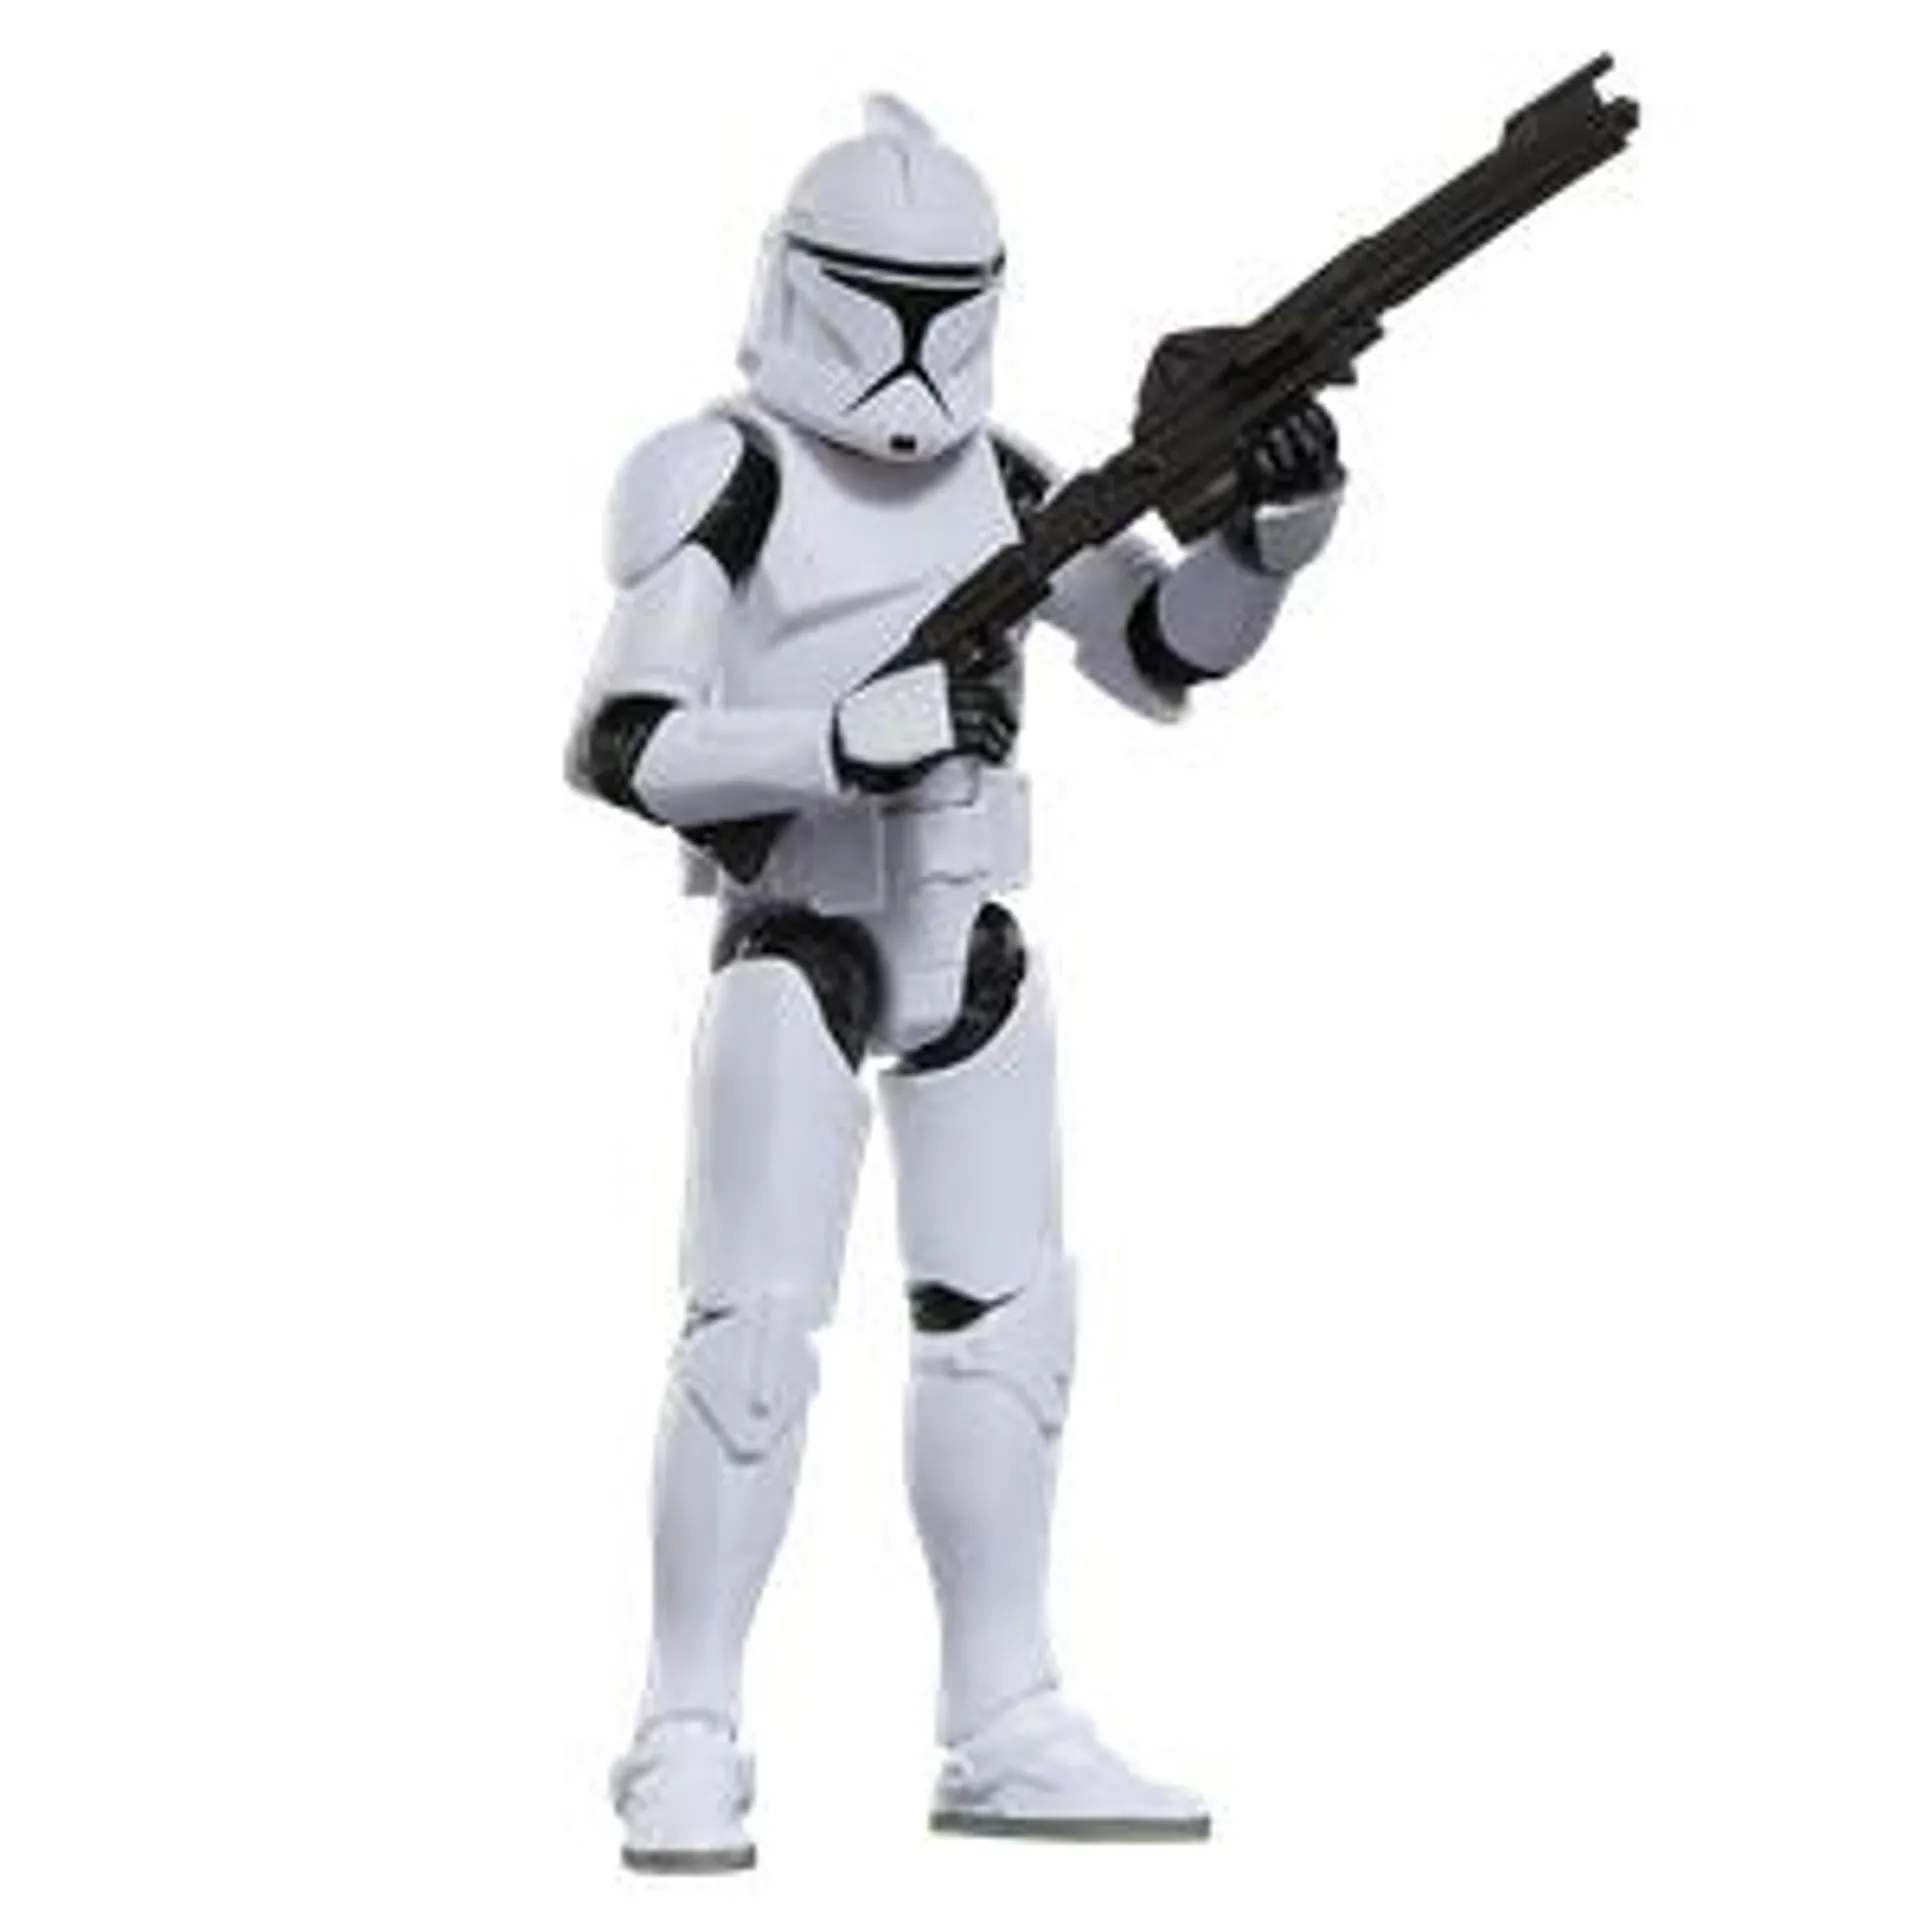 Star Wars: Attack Of The Clones: Vintage Collection Action Figure: Phase 1 Clone Trooper